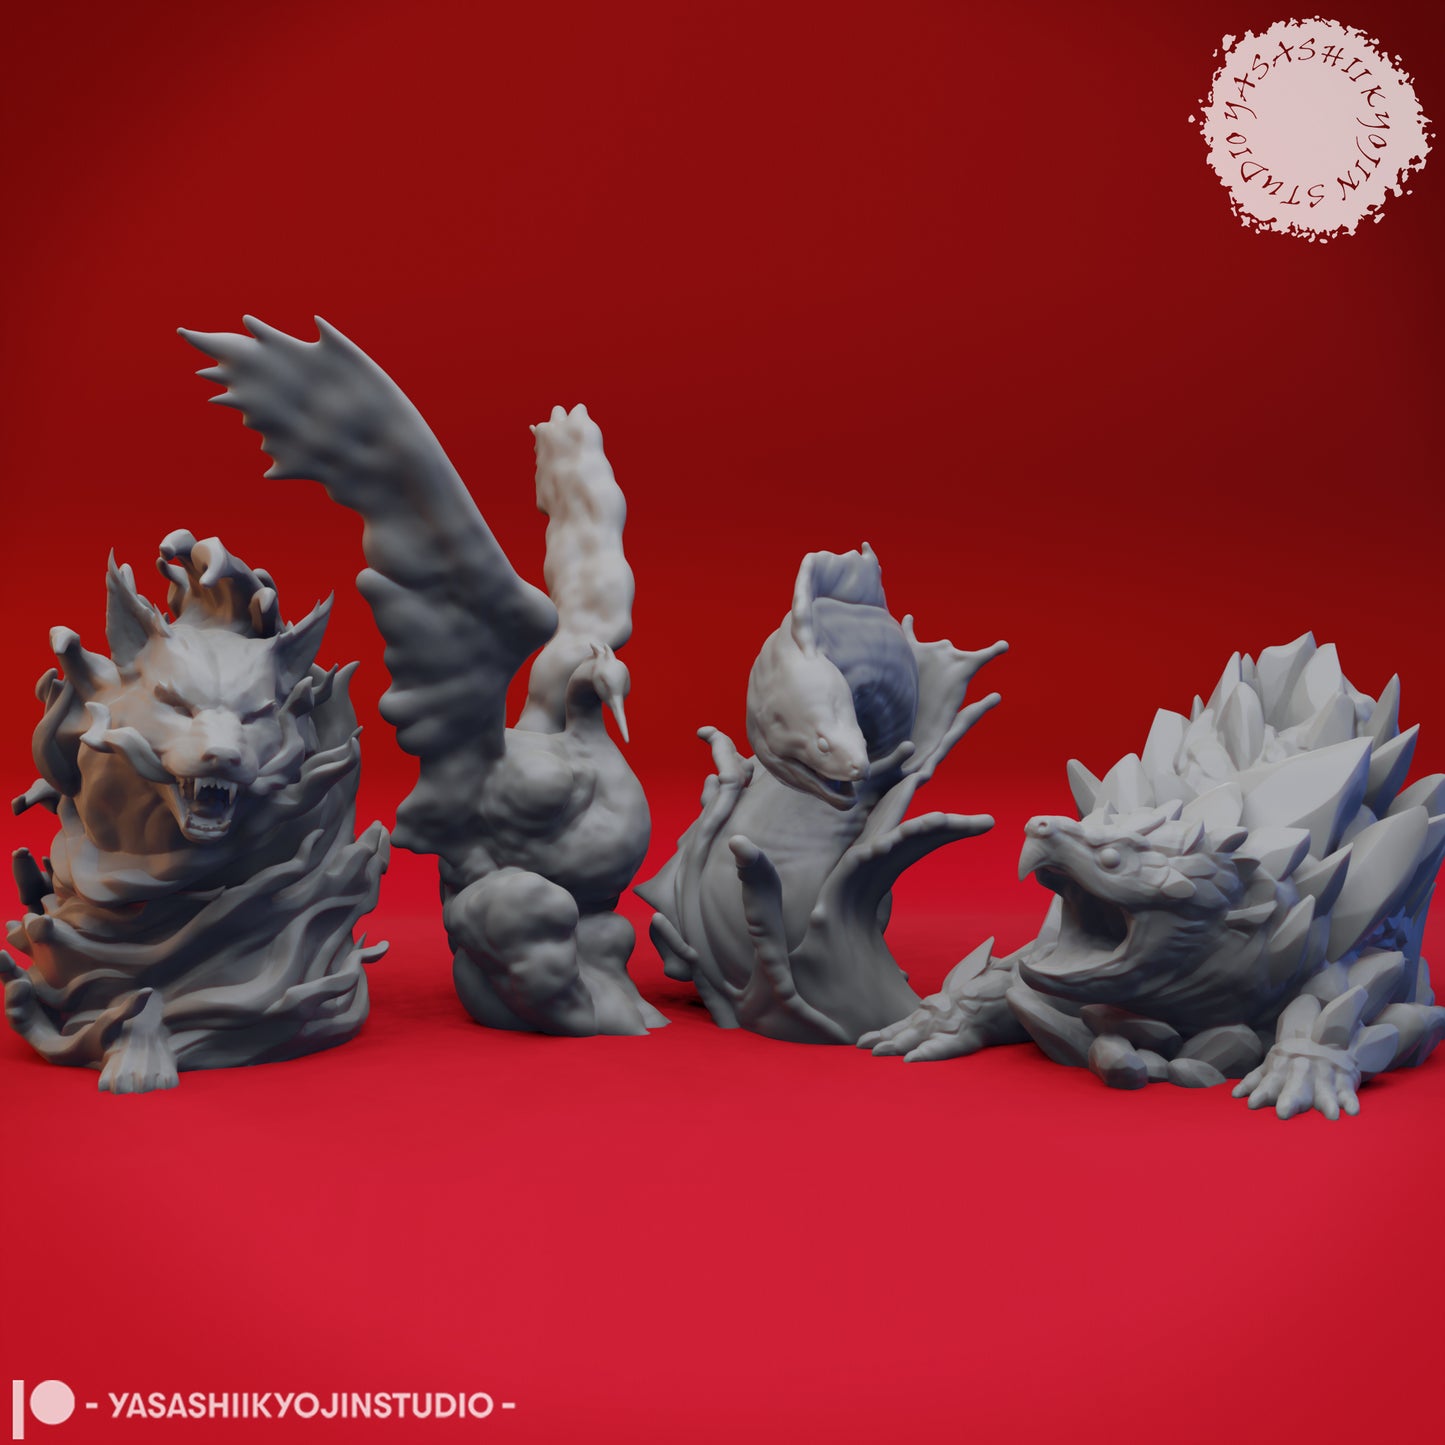 Elementals - Tabletop Miniature (Pre-Supported STL)